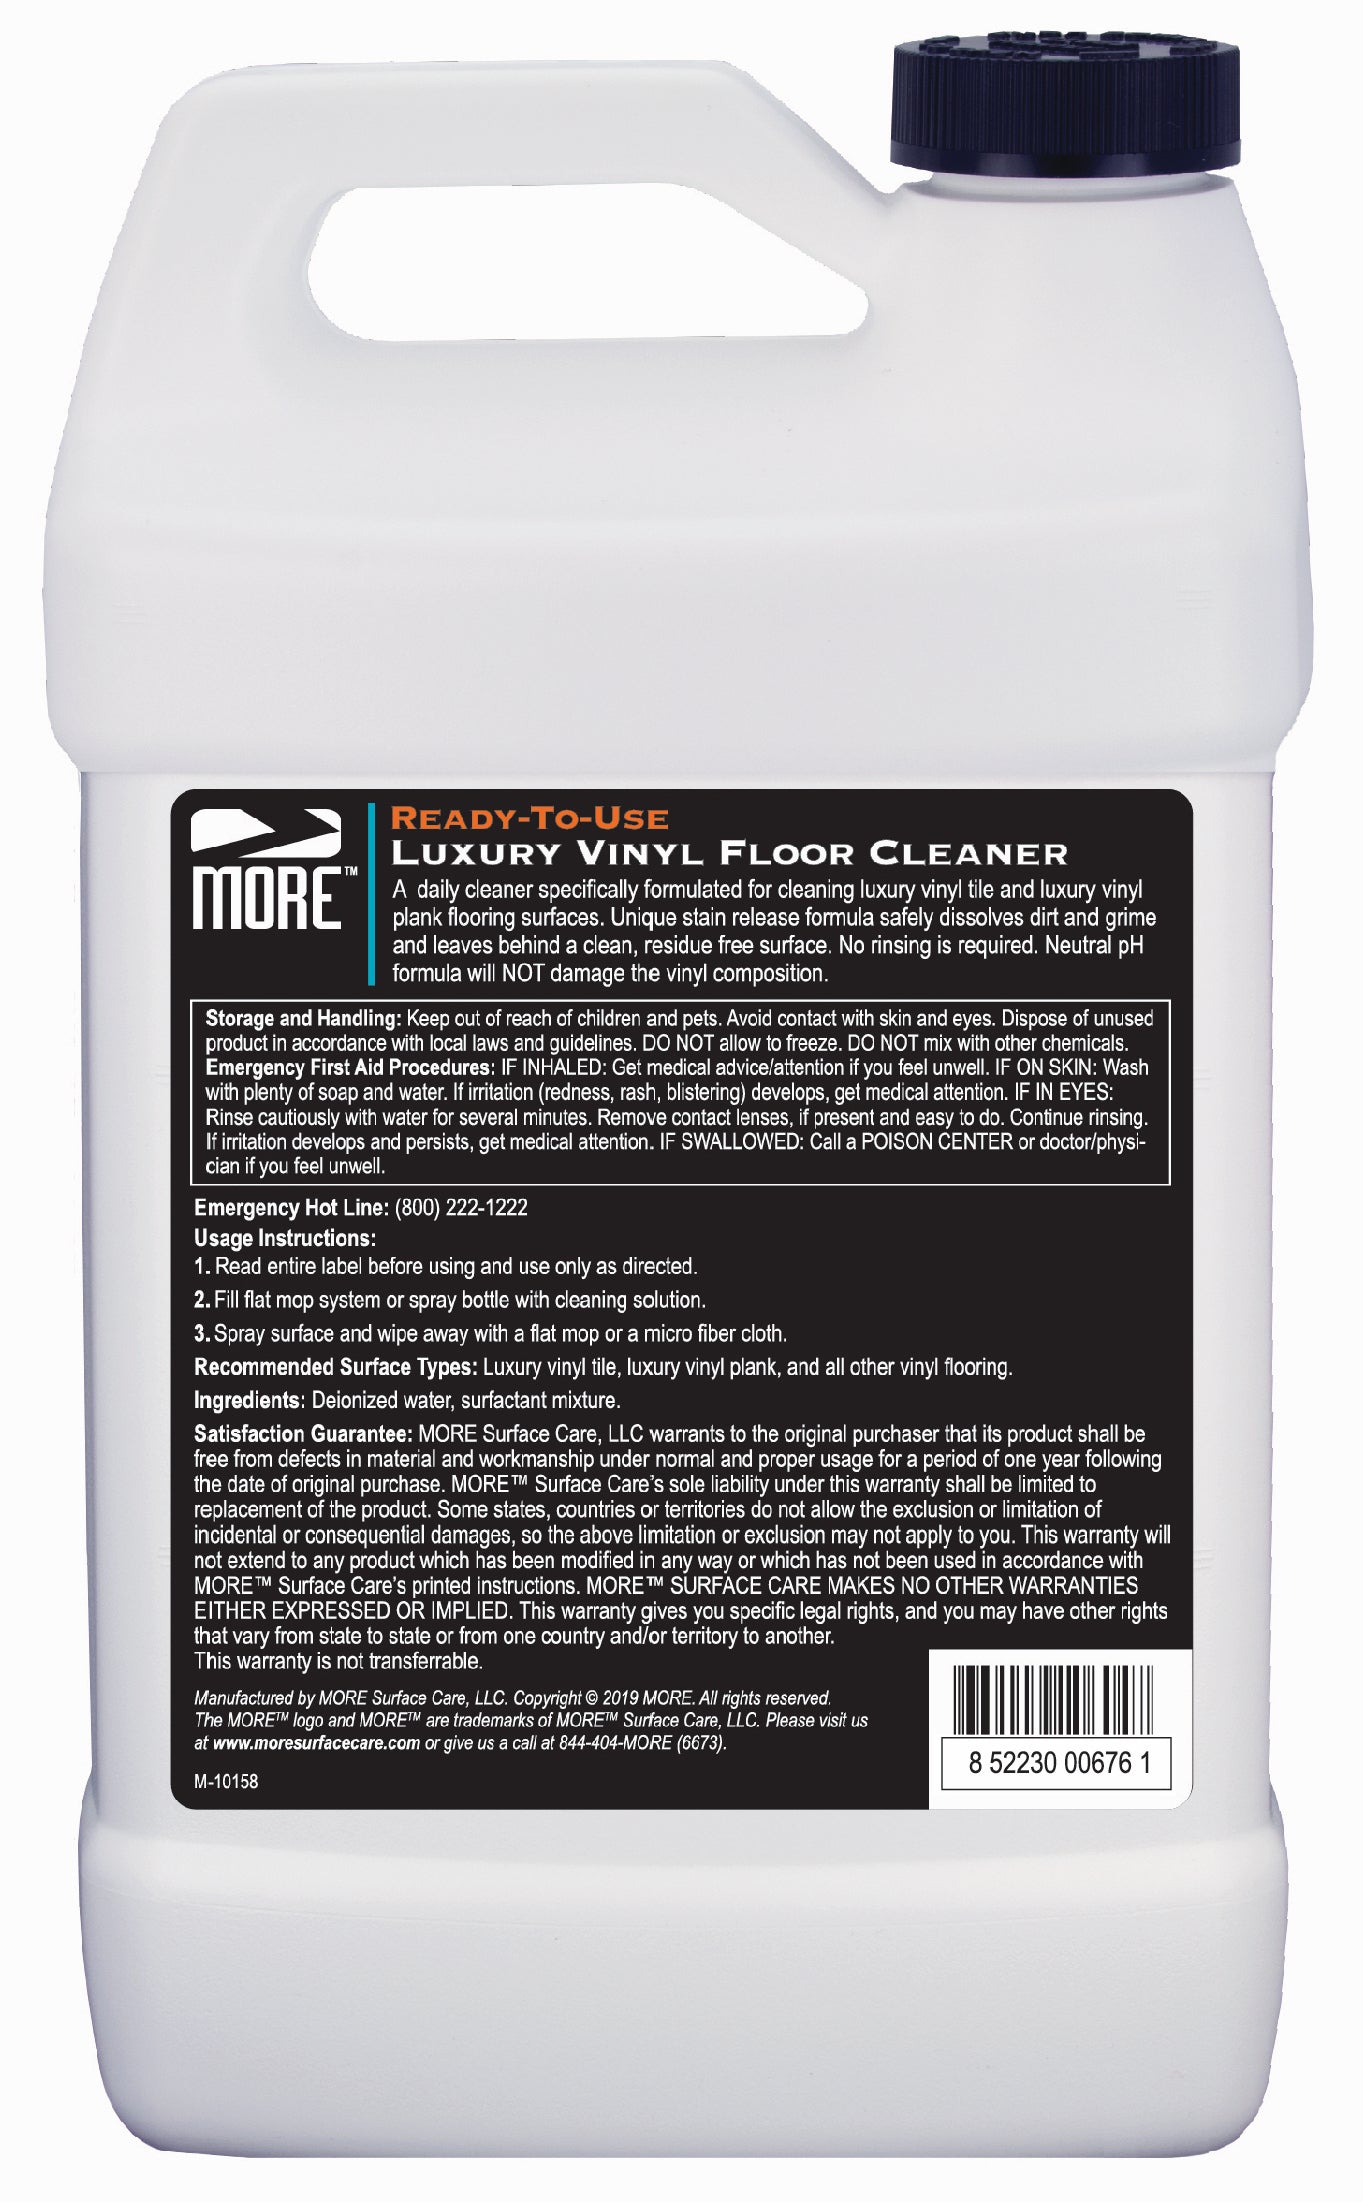 MORE™ Luxury Vinyl Floor Cleaner - MORE Surface Care